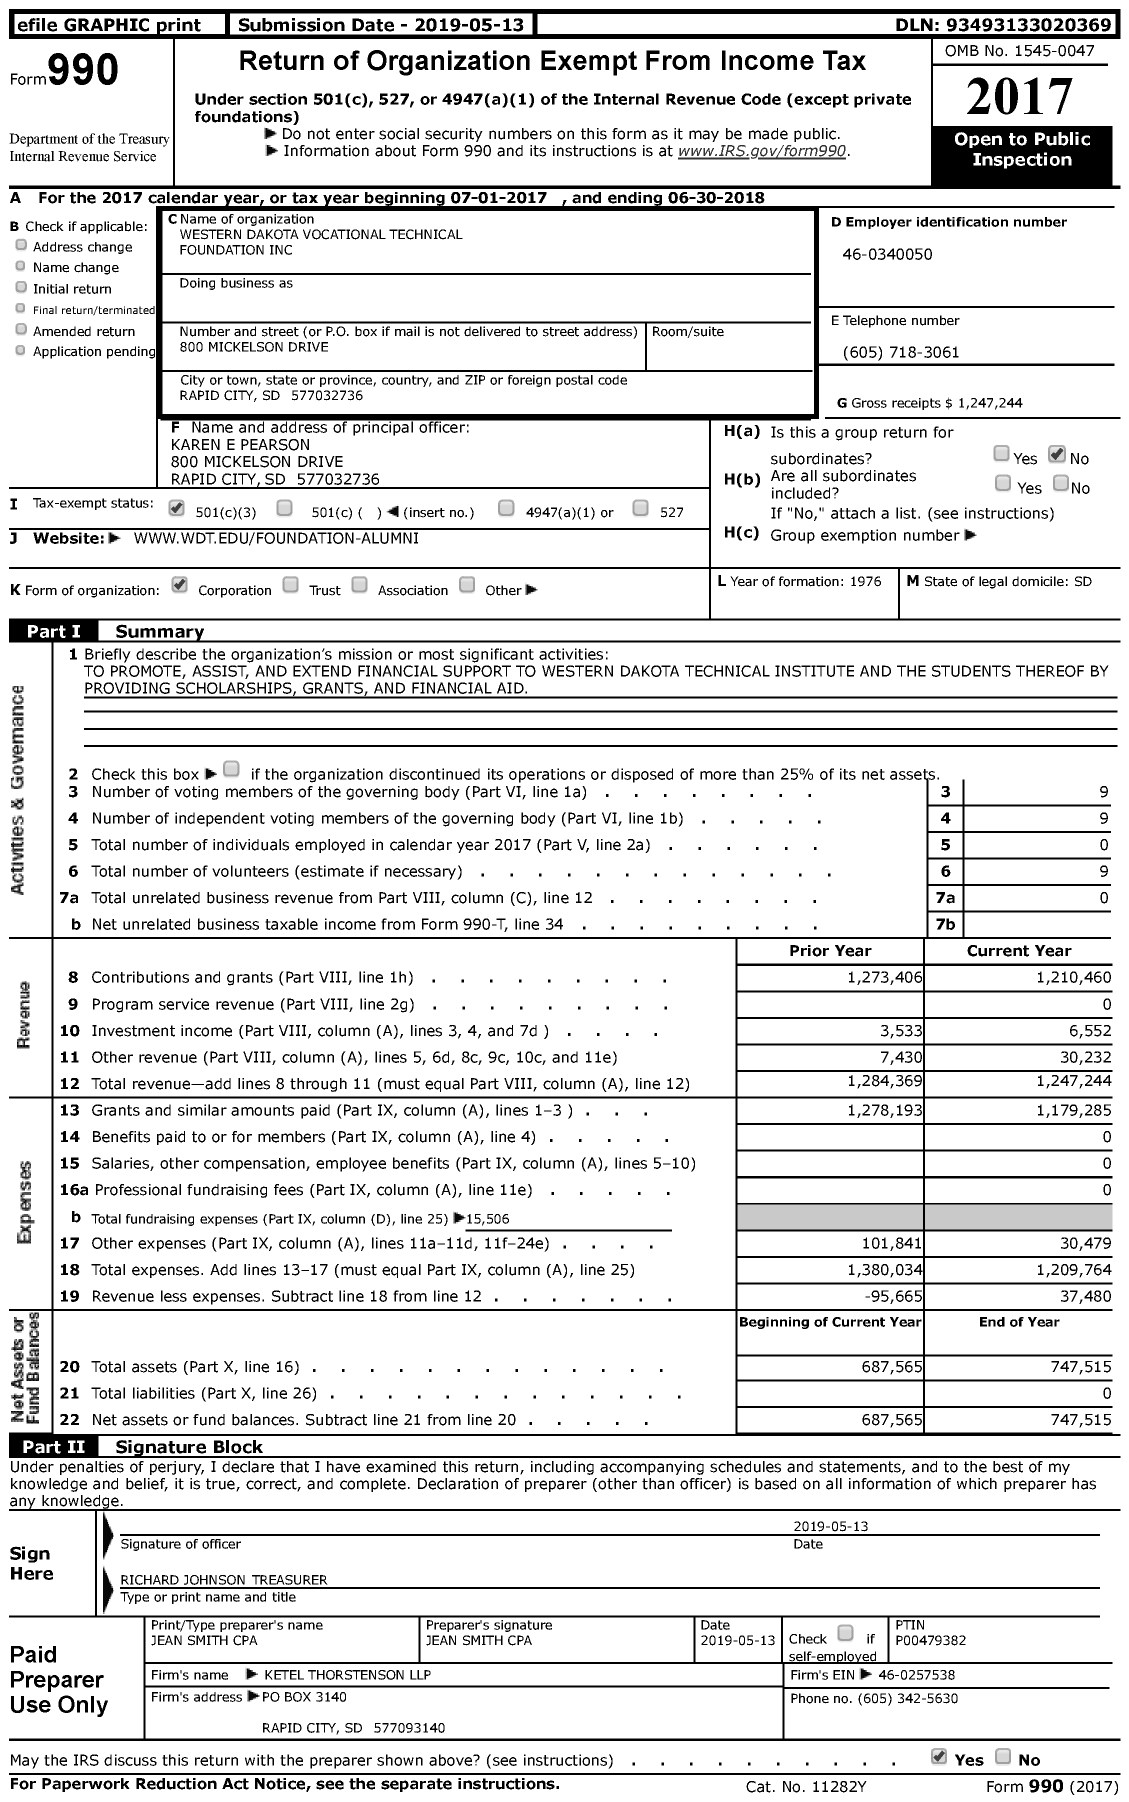 Image of first page of 2017 Form 990 for Western Dakota Vocational Technical Foundation